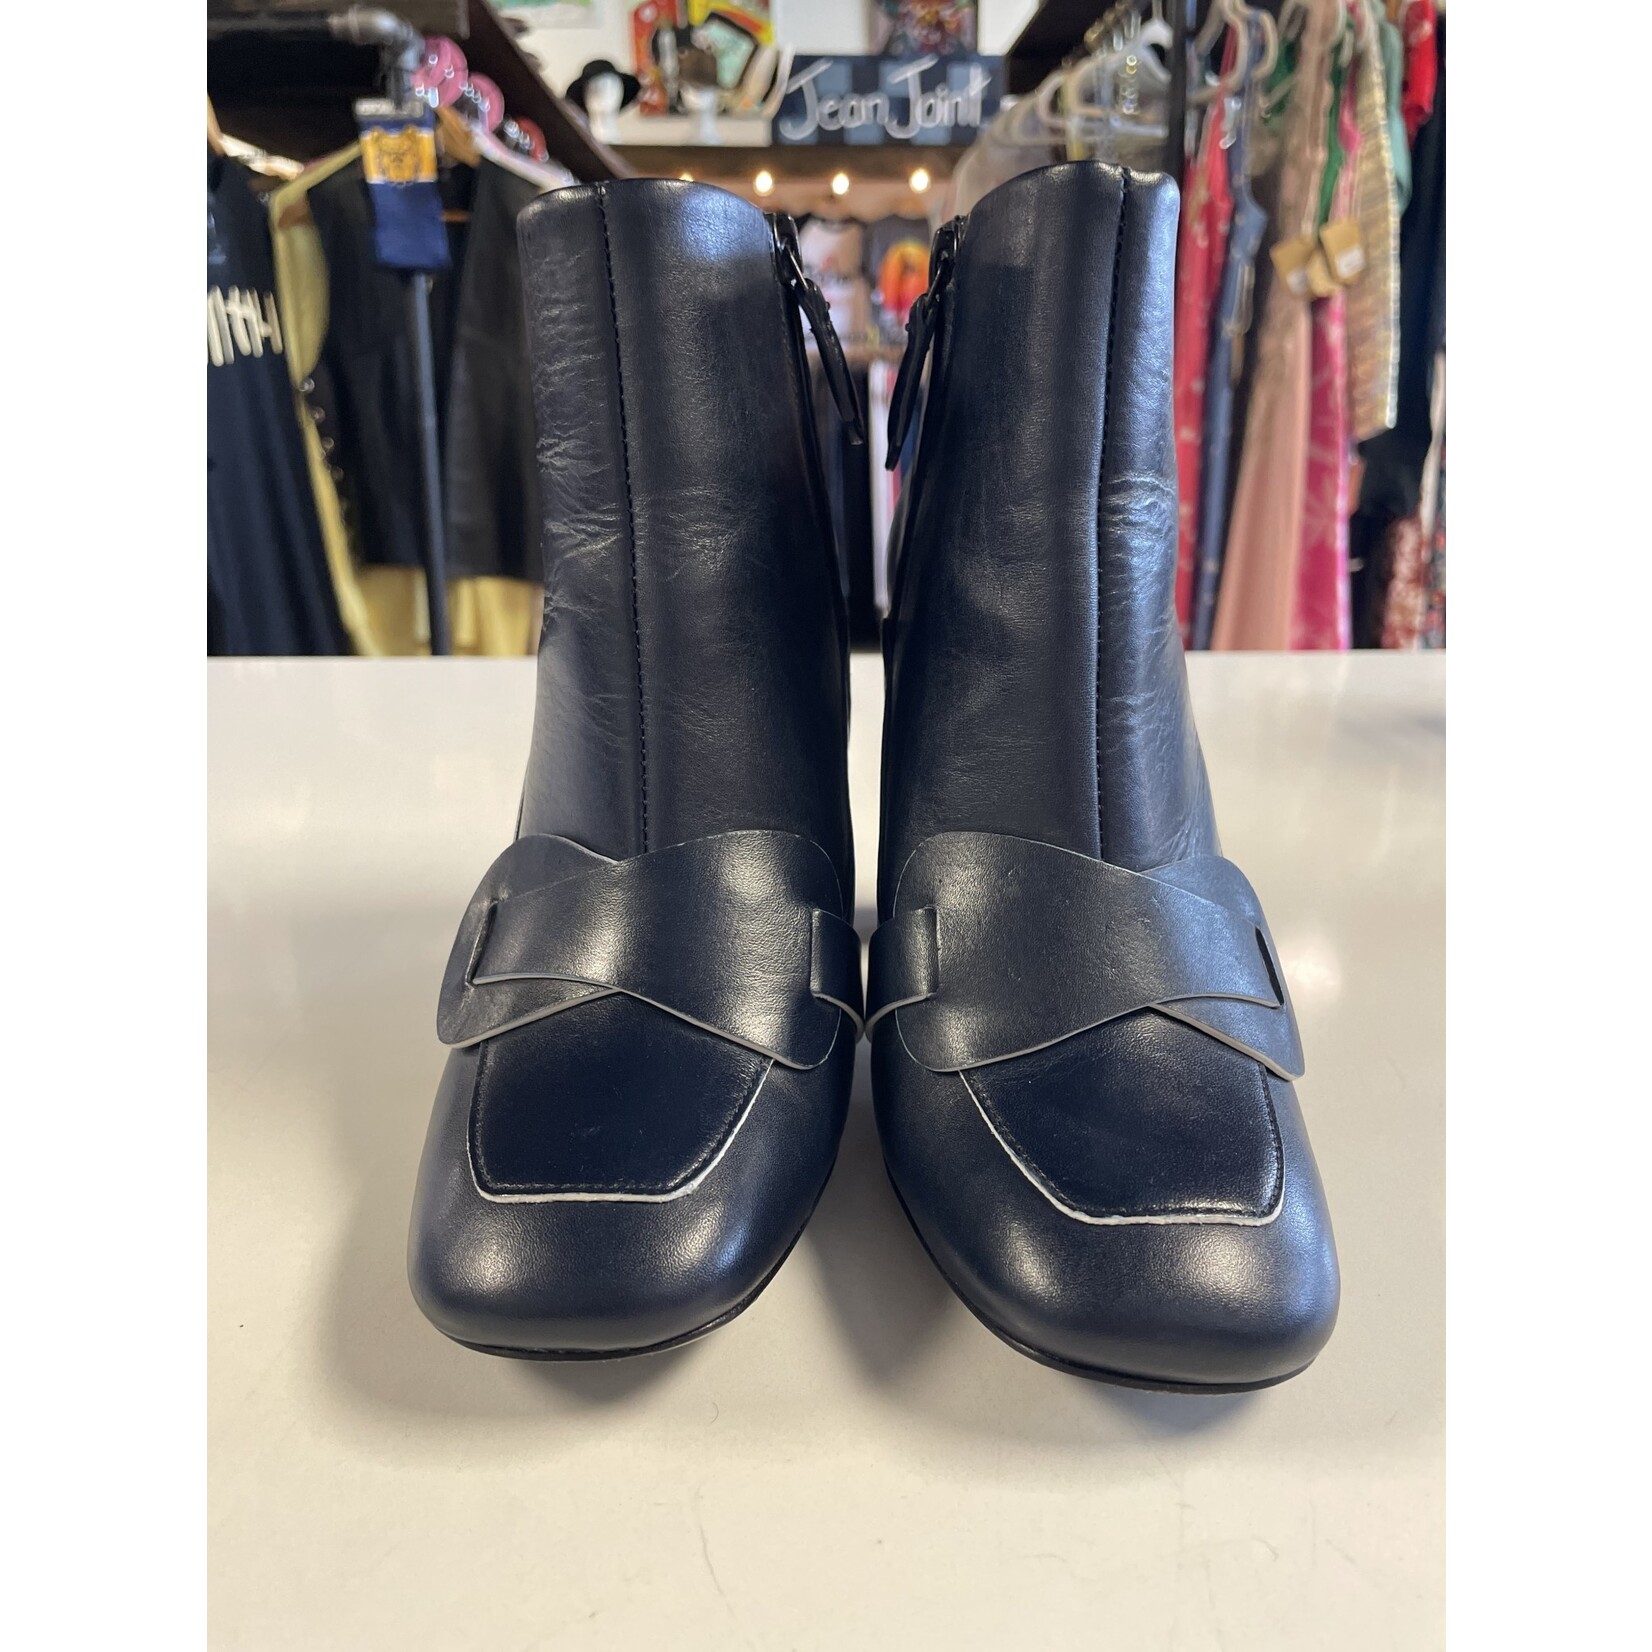 Tory Burch, Navy, "BOND", Booties, Leather, 7, MSRP $450